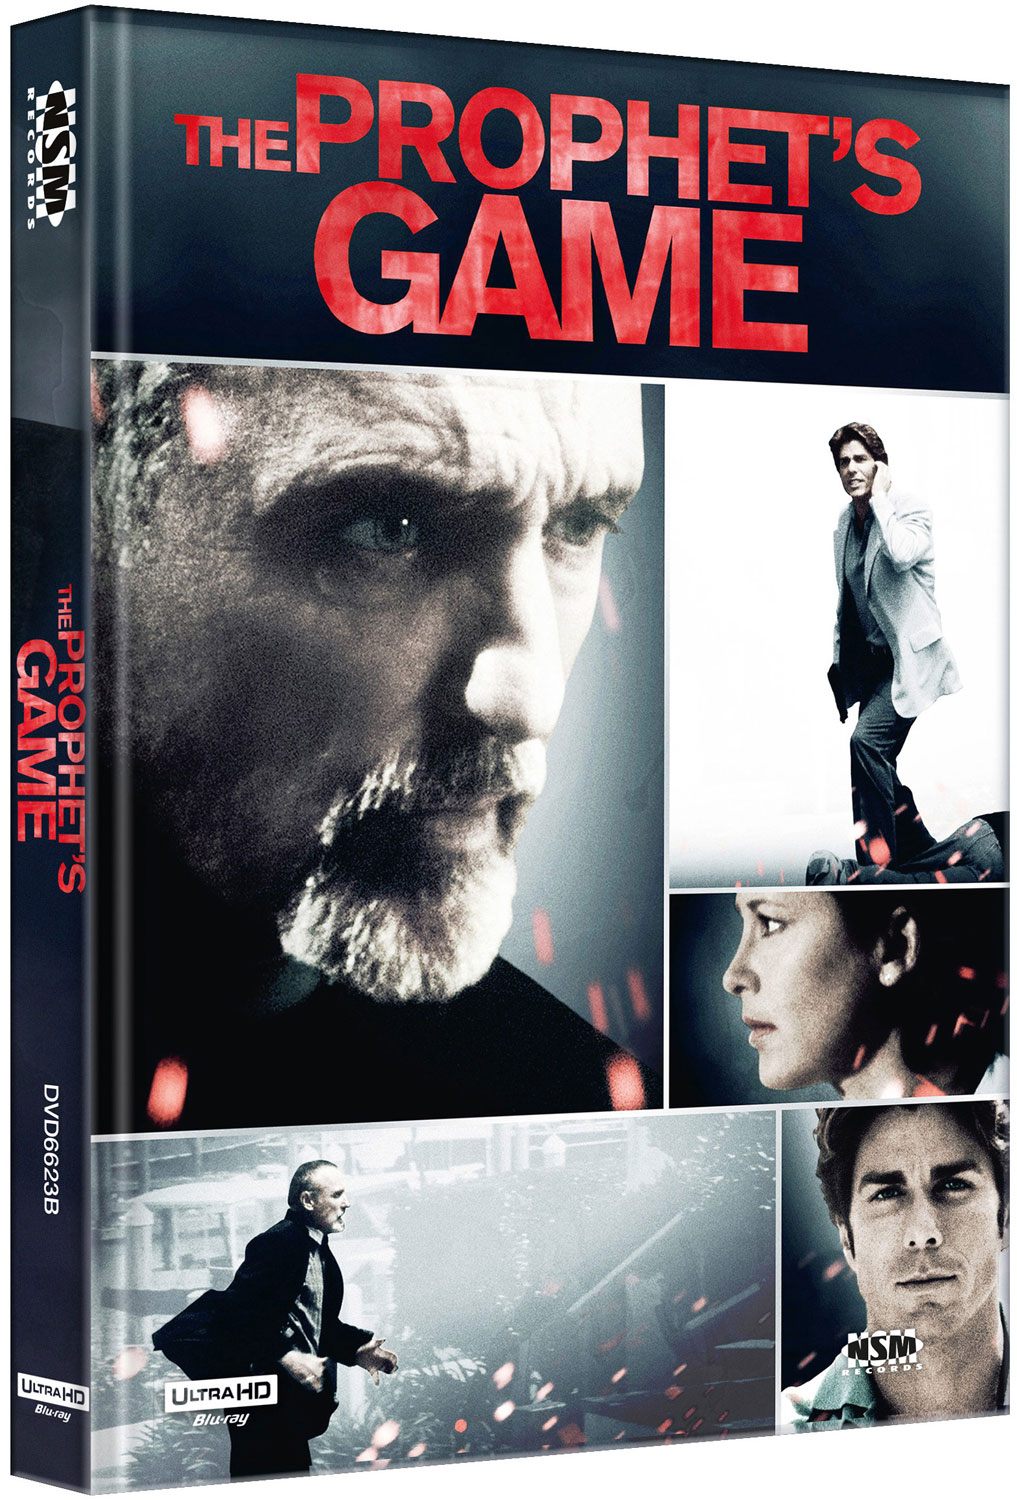 PROPHETS GAME - IM NETZ DES TODES (4K UHD+Blu-Ray+DVD) - Cover B - Mediabook - Limited 66 Edition